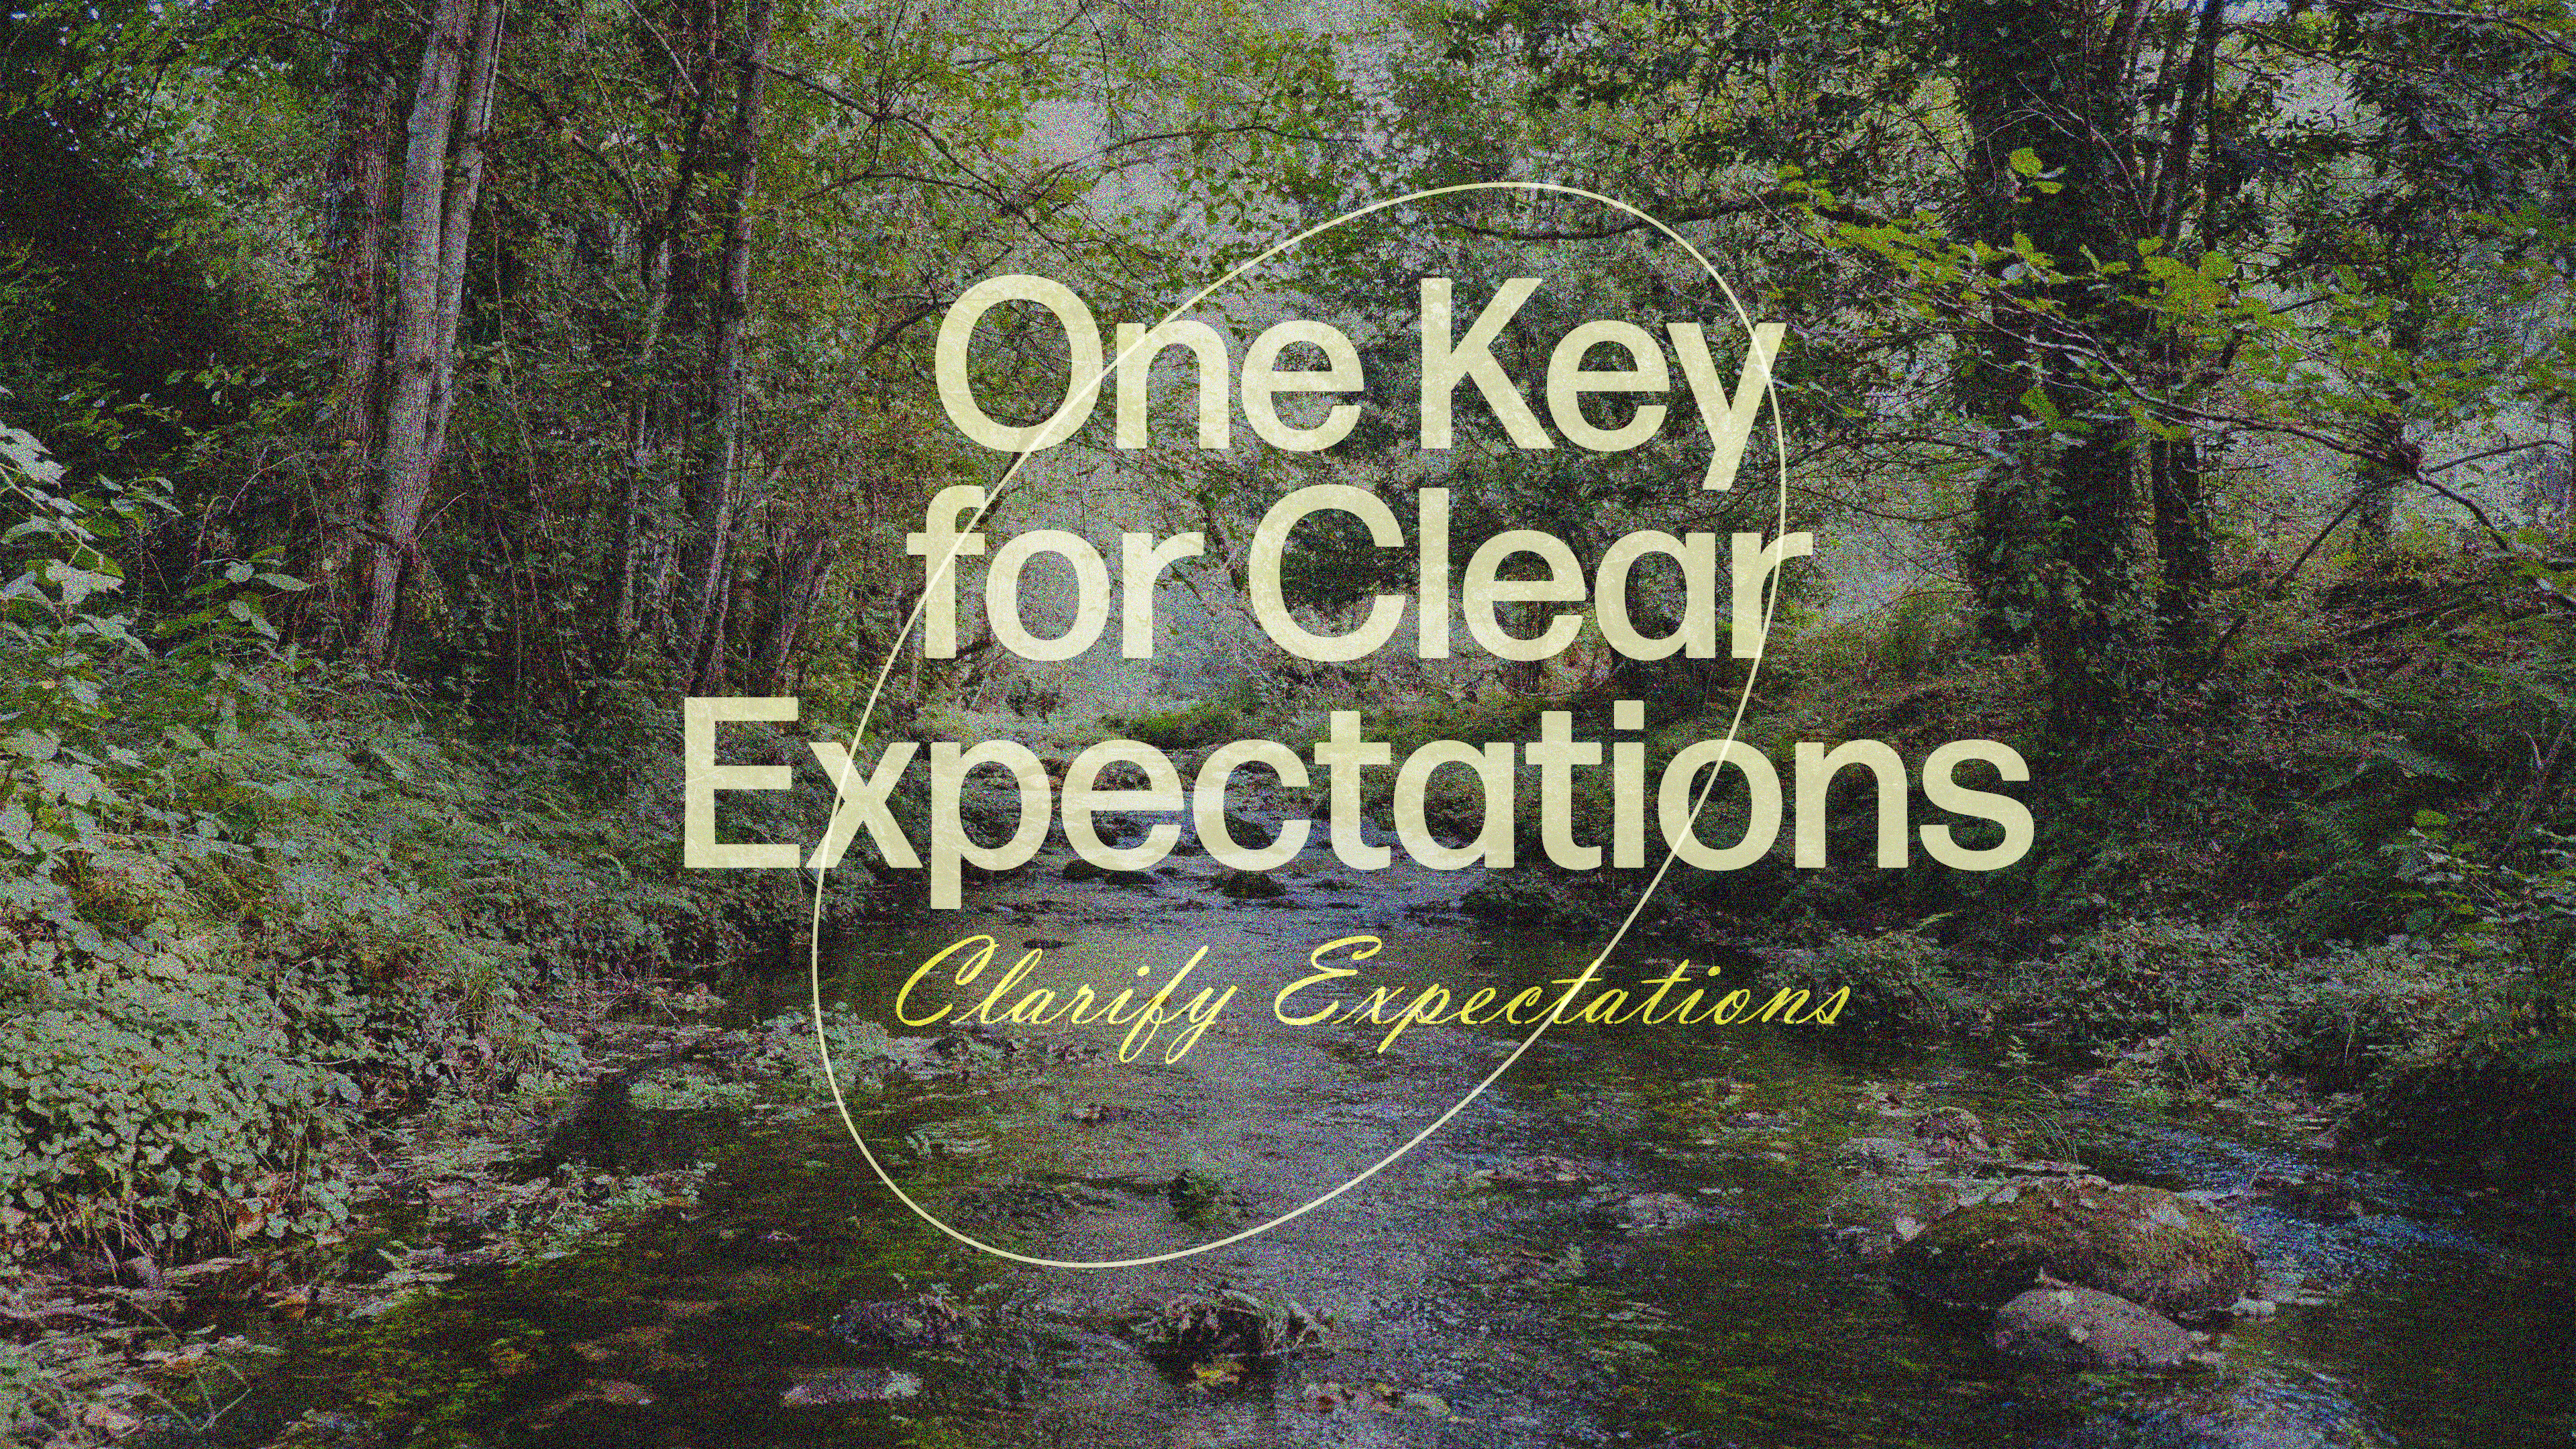 Clarify expectations – One Key For Clear Expectations